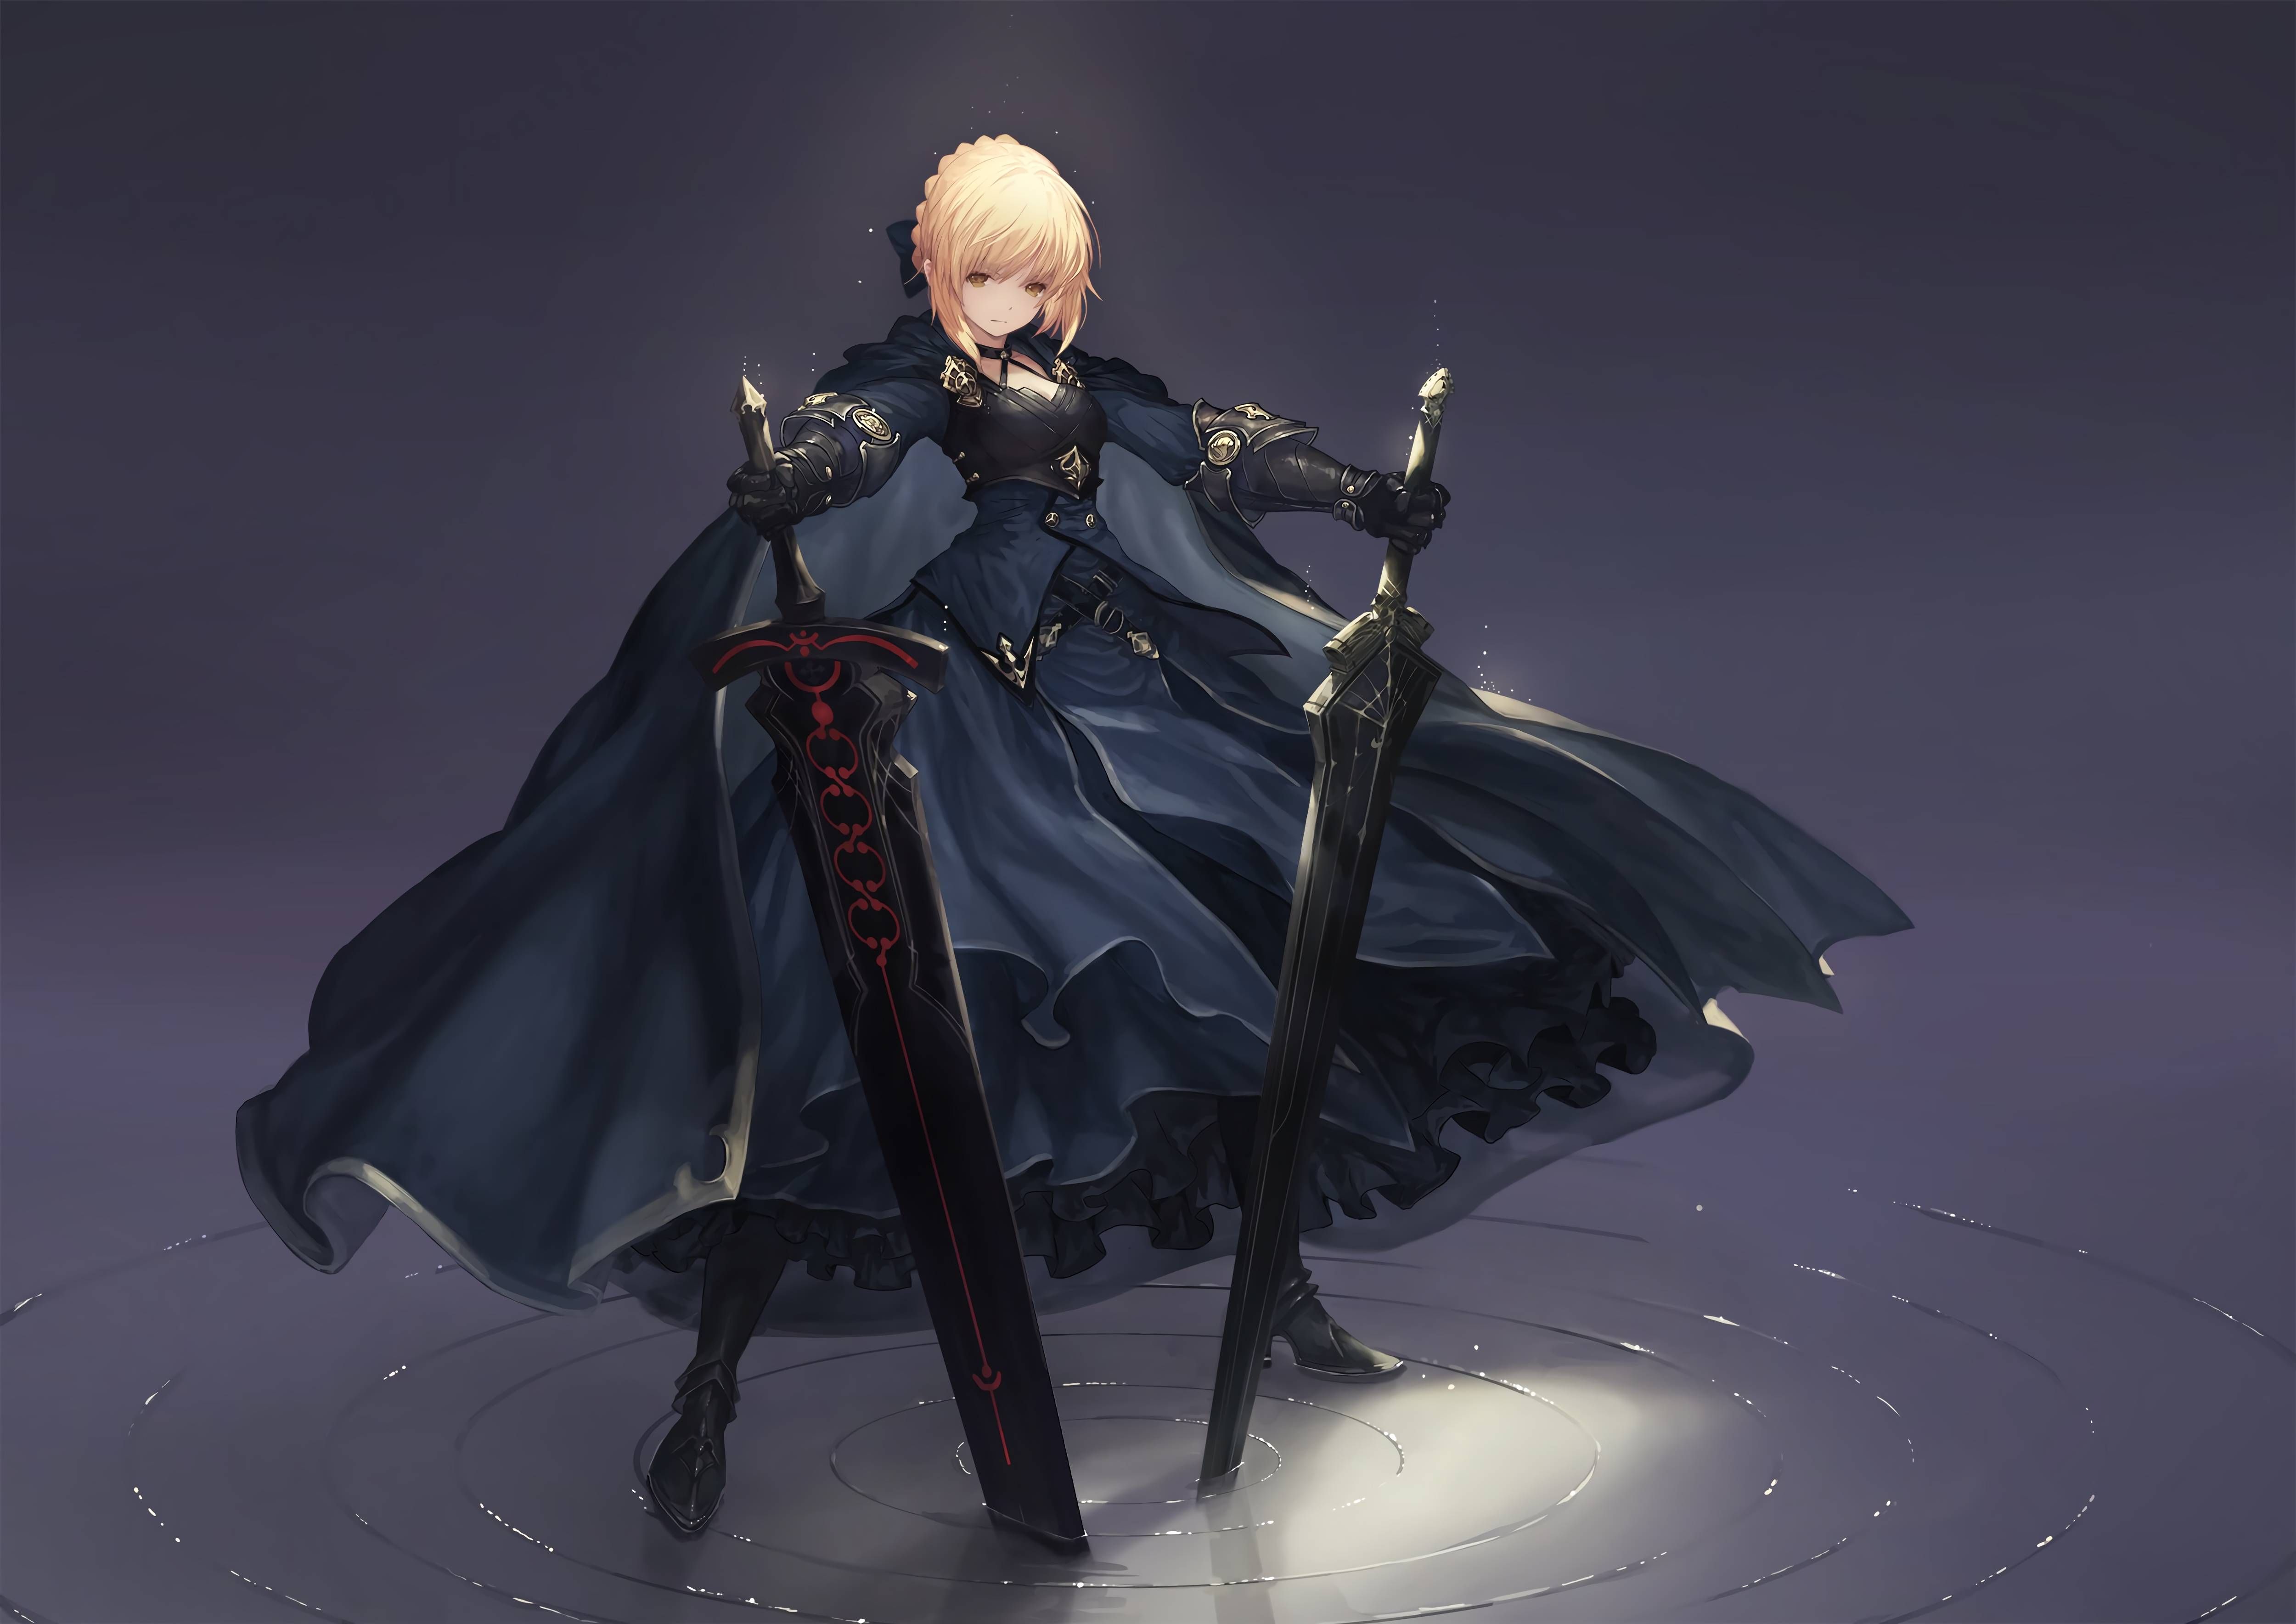 Saber From Fate/Stay Night by ThePJhayes on DeviantArt